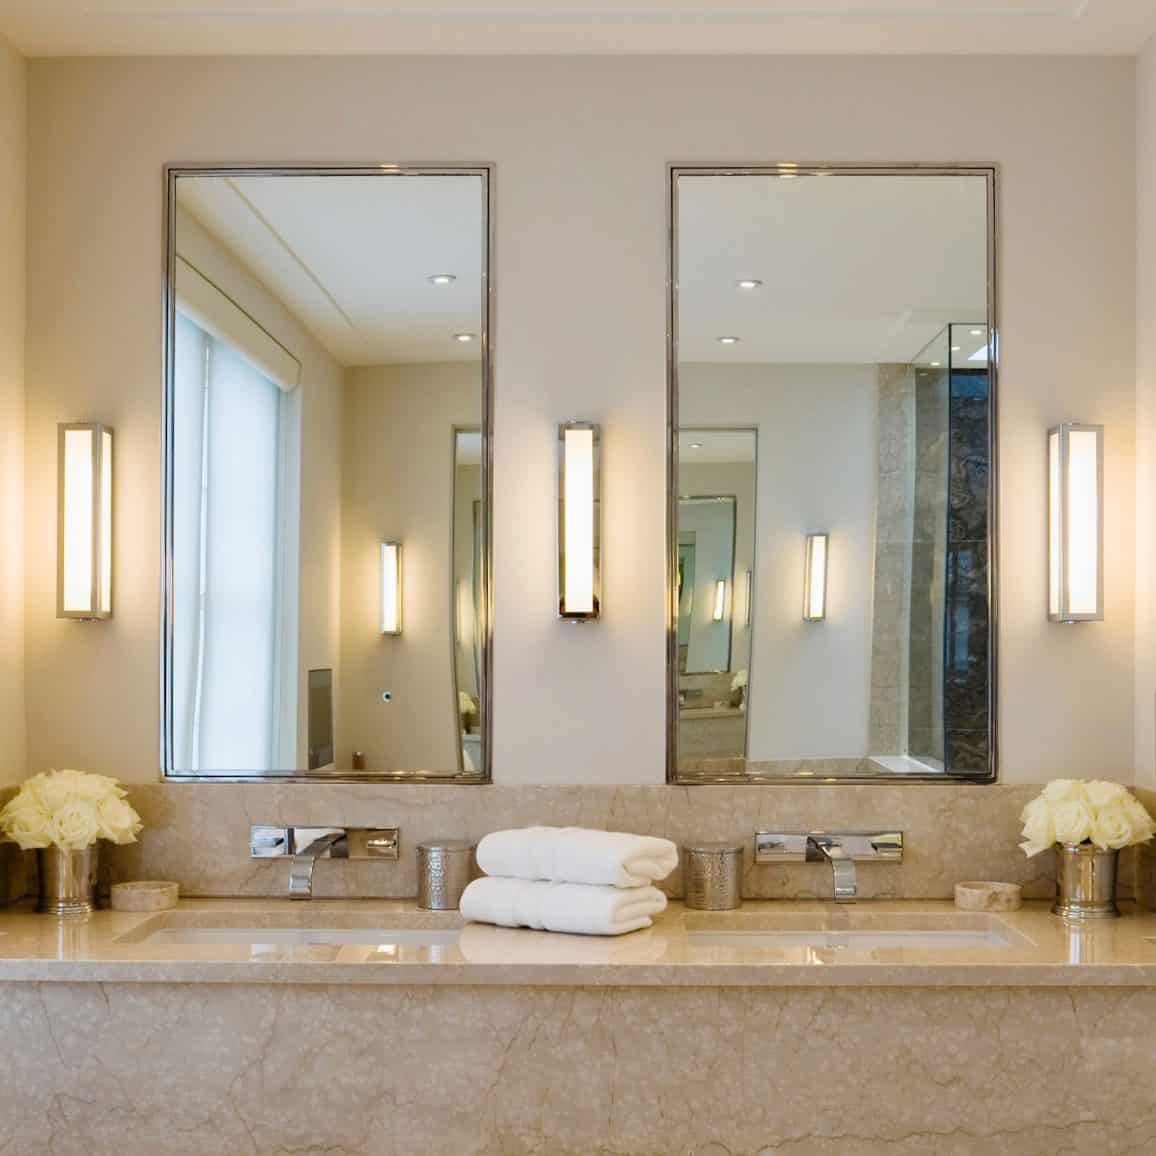 To Pee or Not to Pee?: Holland's Exquisite Bathroom Lighting